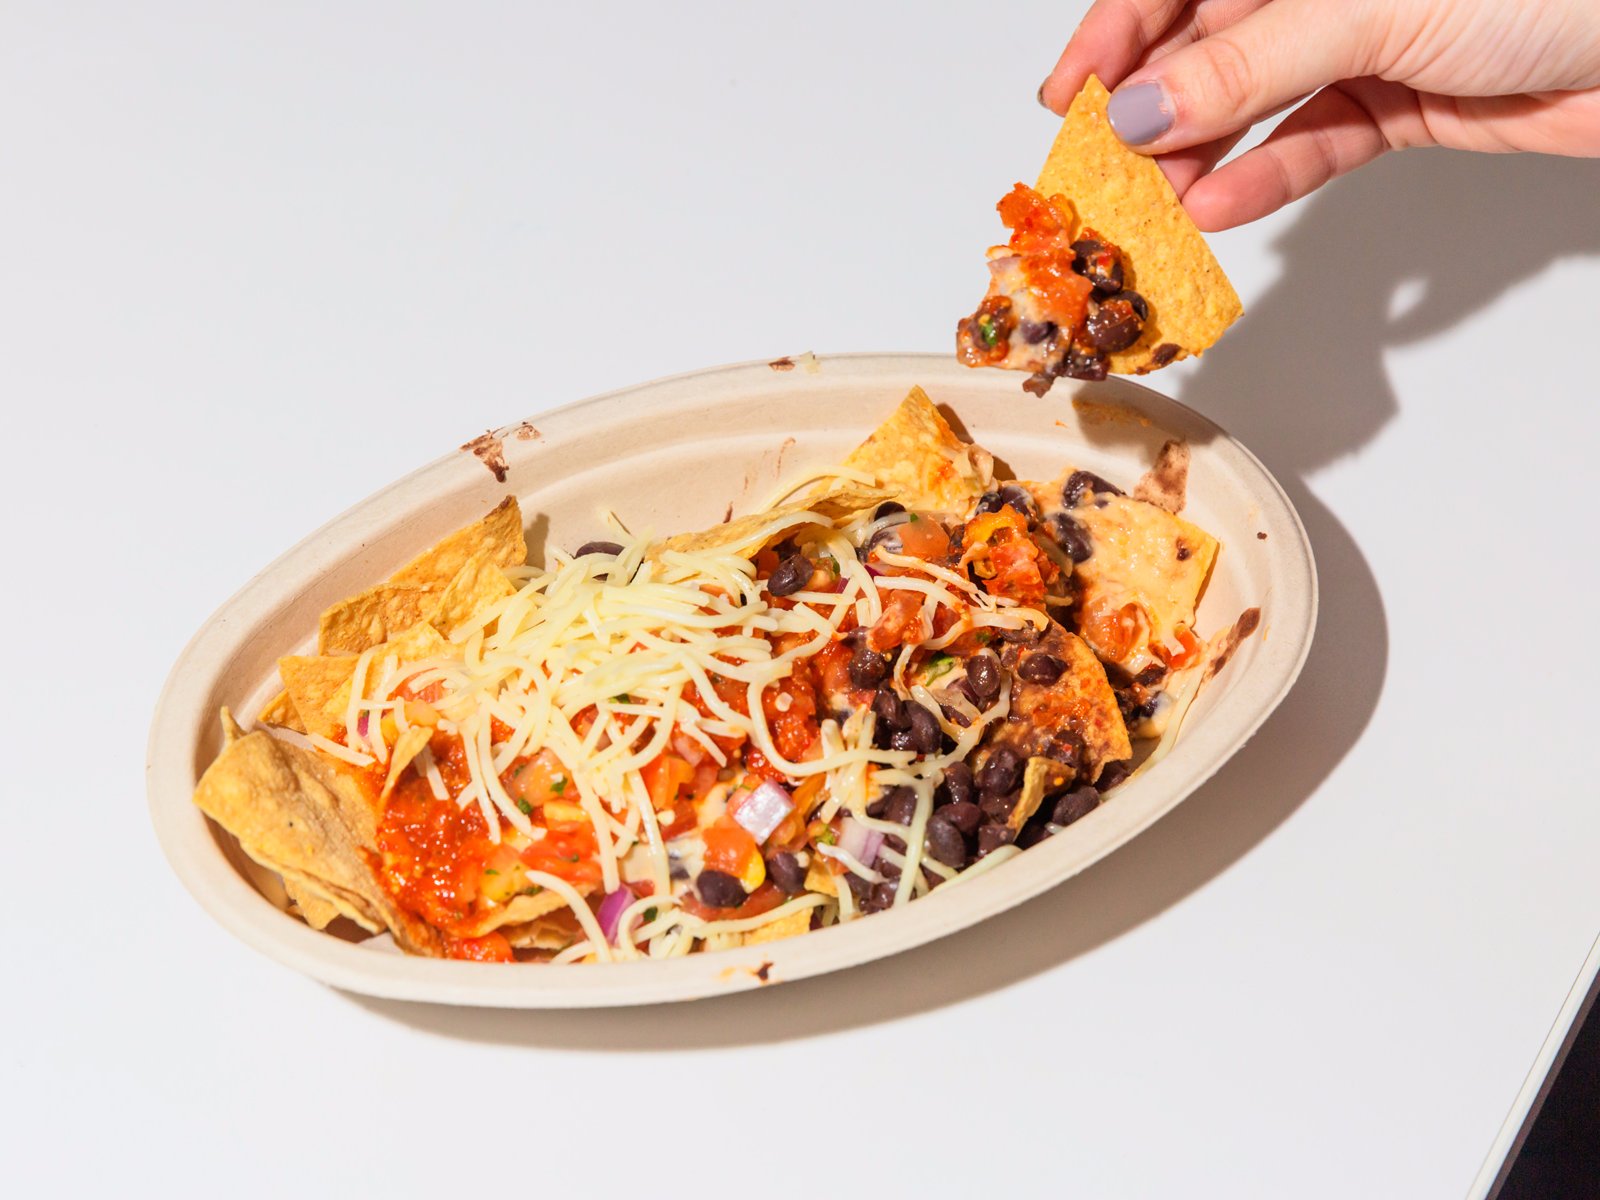 The Chipotle Health Scare Has Expanded To Another